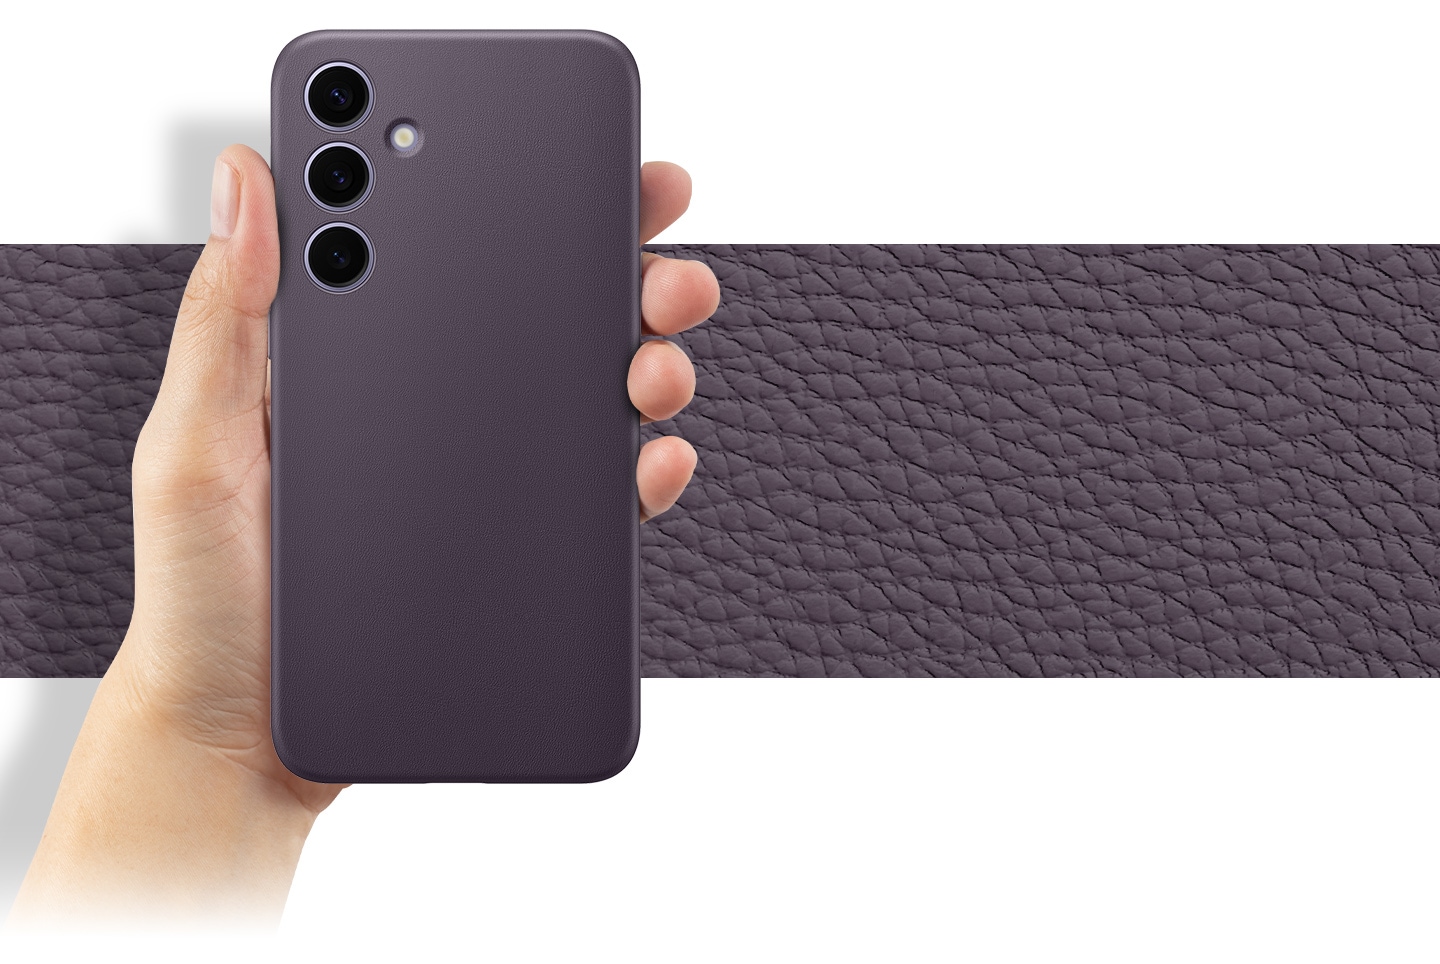 Wrap your phone in elegance with the Vegan Leather Case. Add a soft, lavish touch while enhancing your device's modern style.